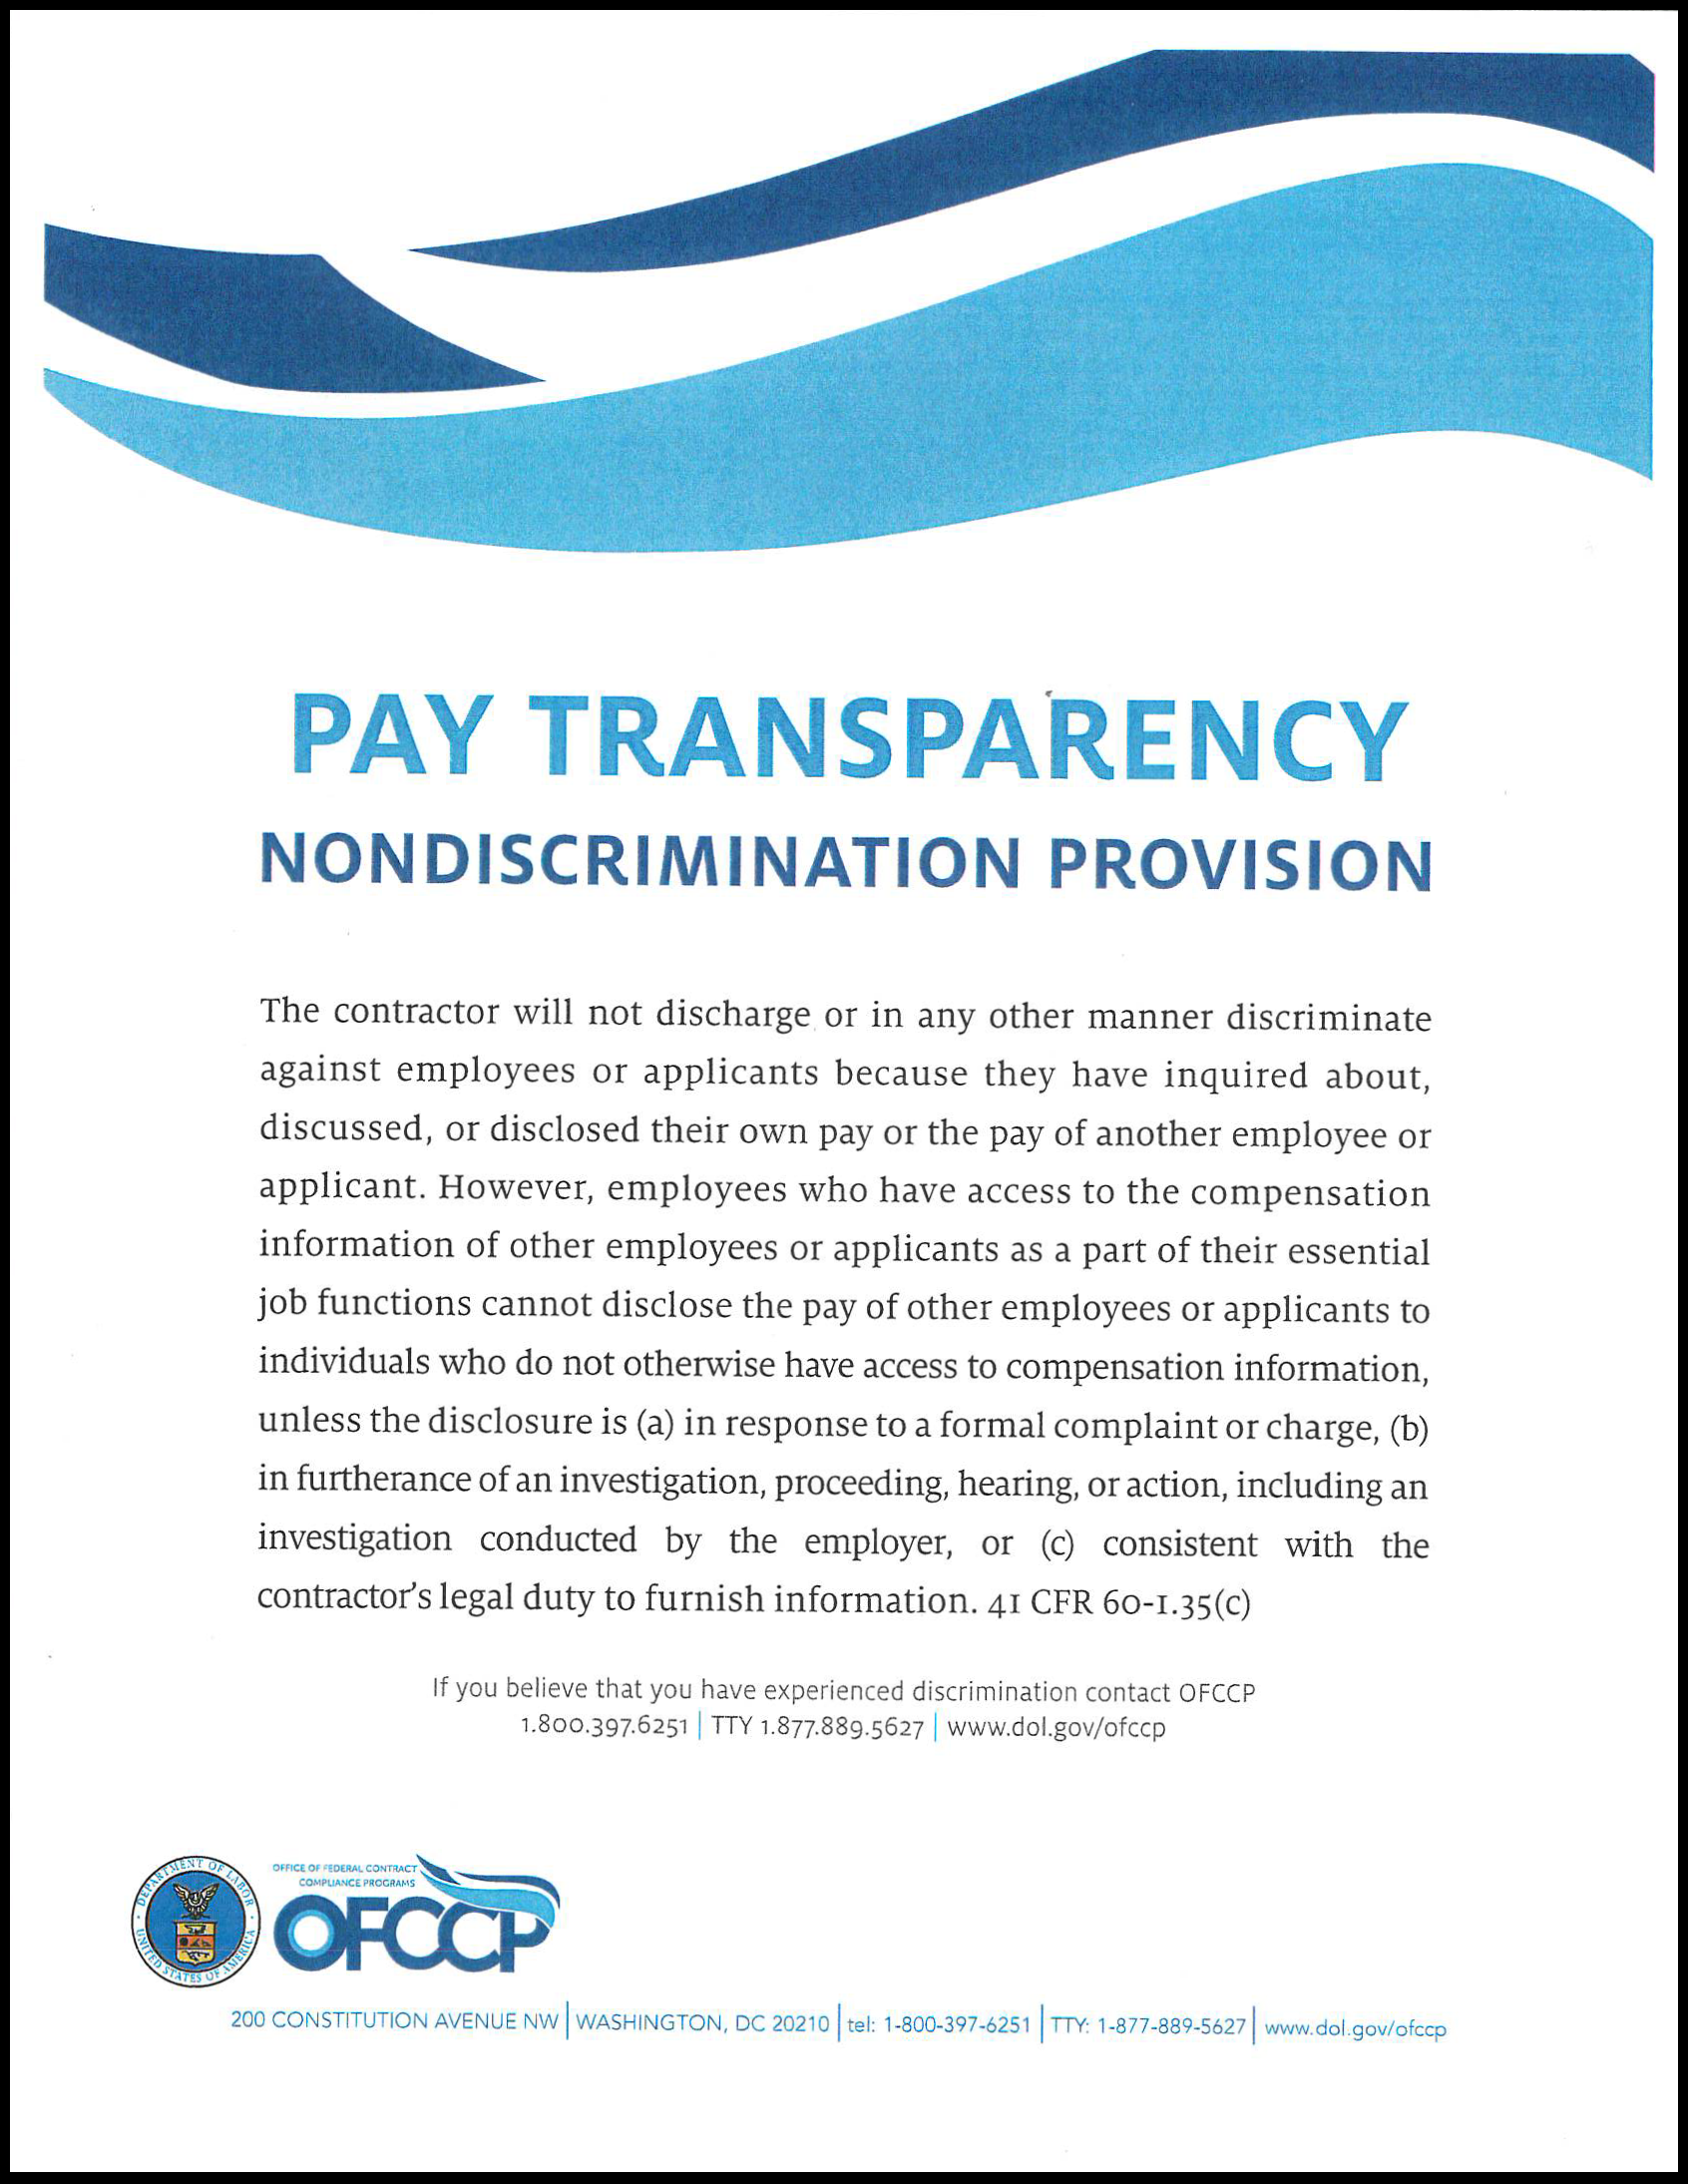 Pay transparency poster